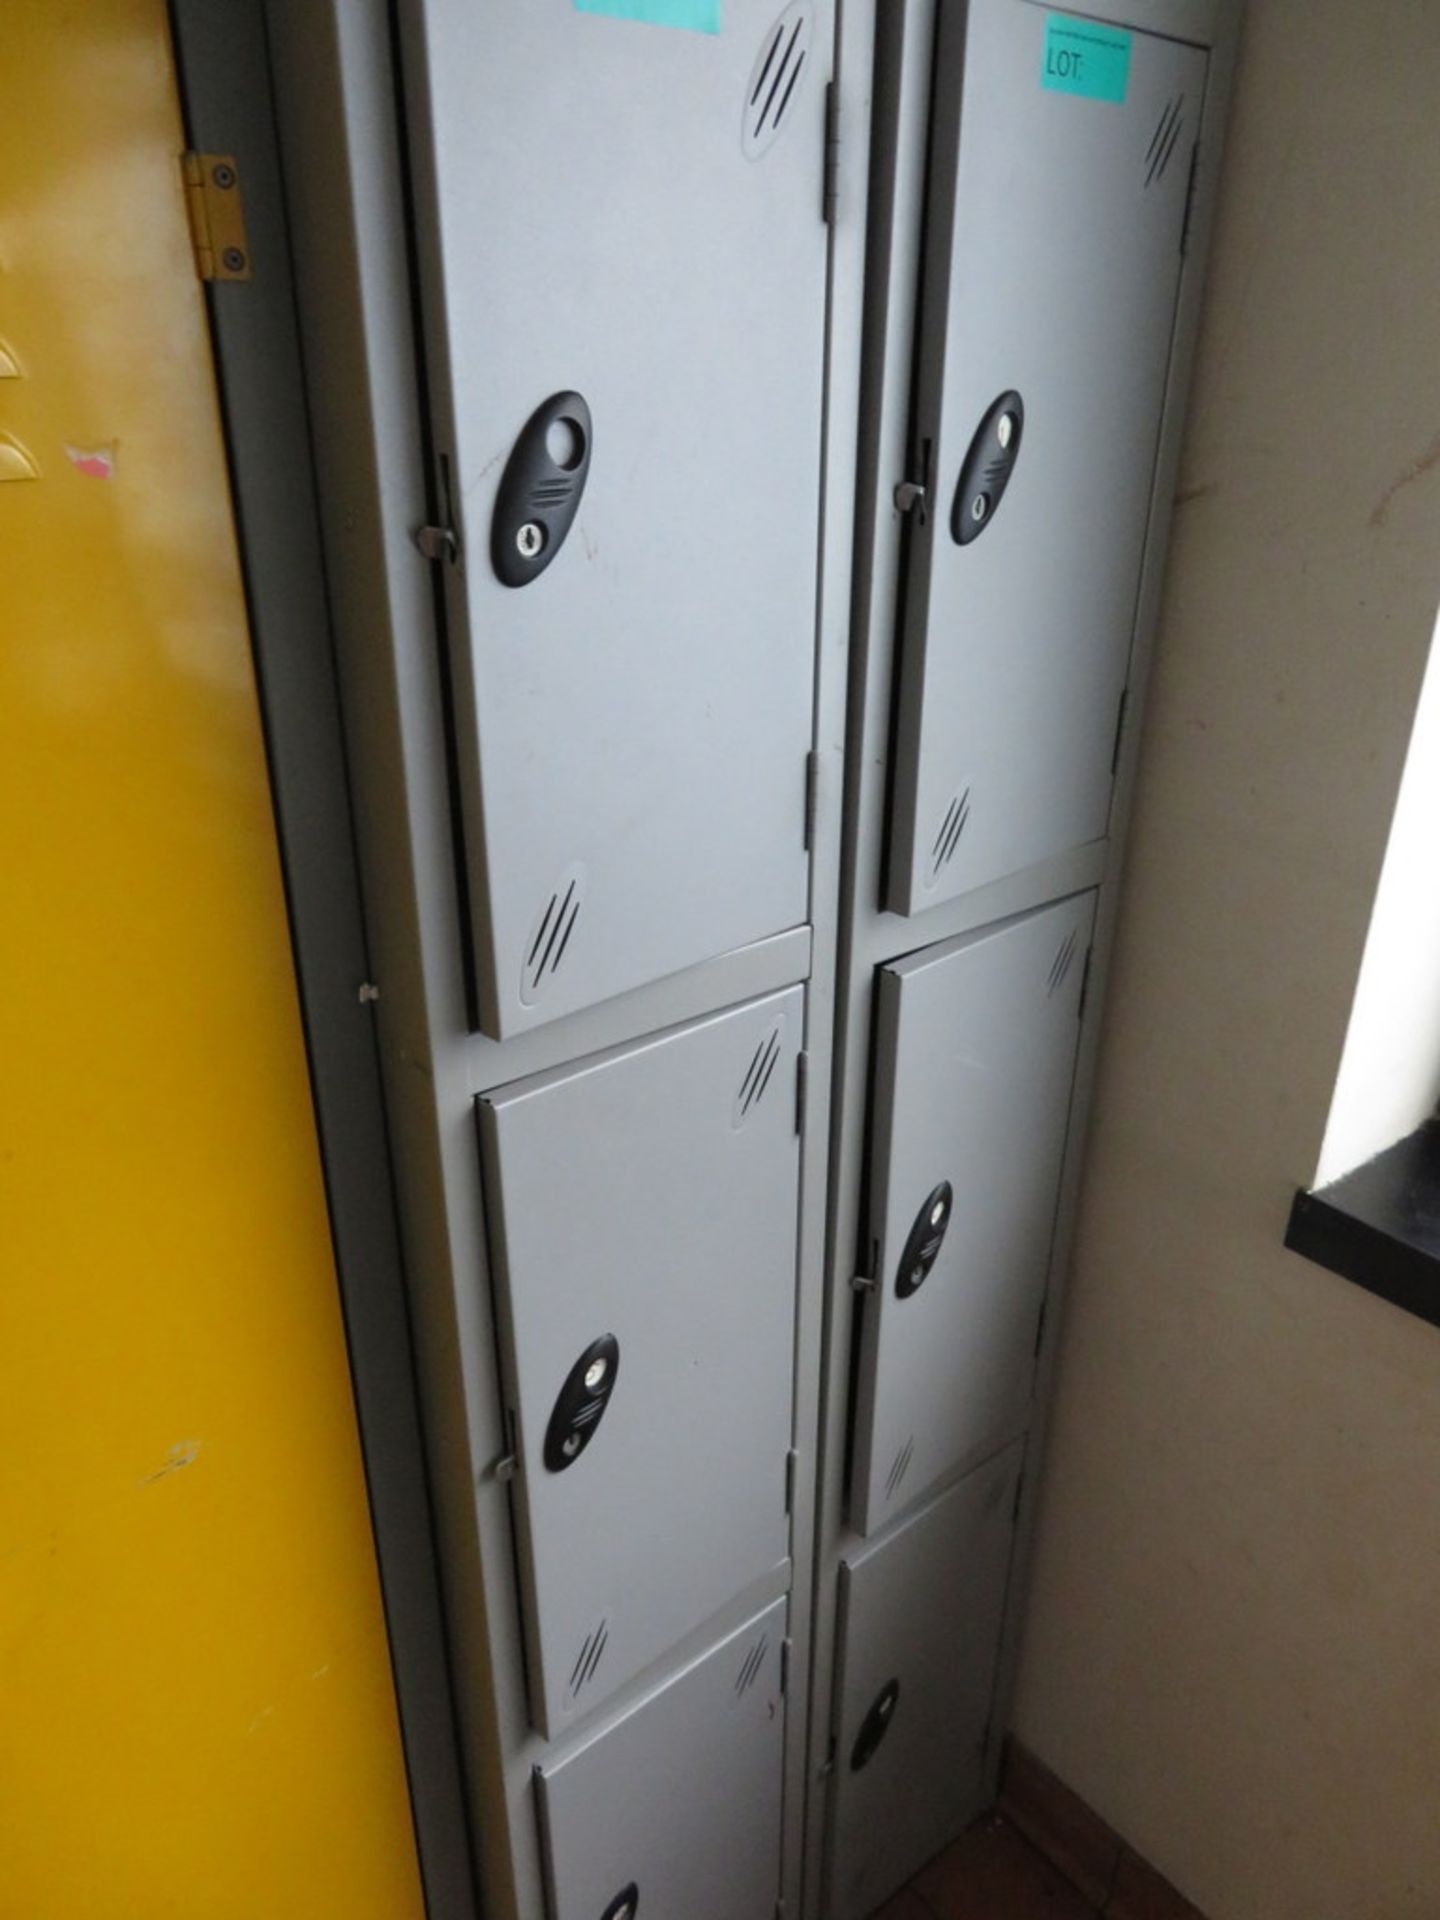 4x Personnel Storage Lockers - Image 4 of 6